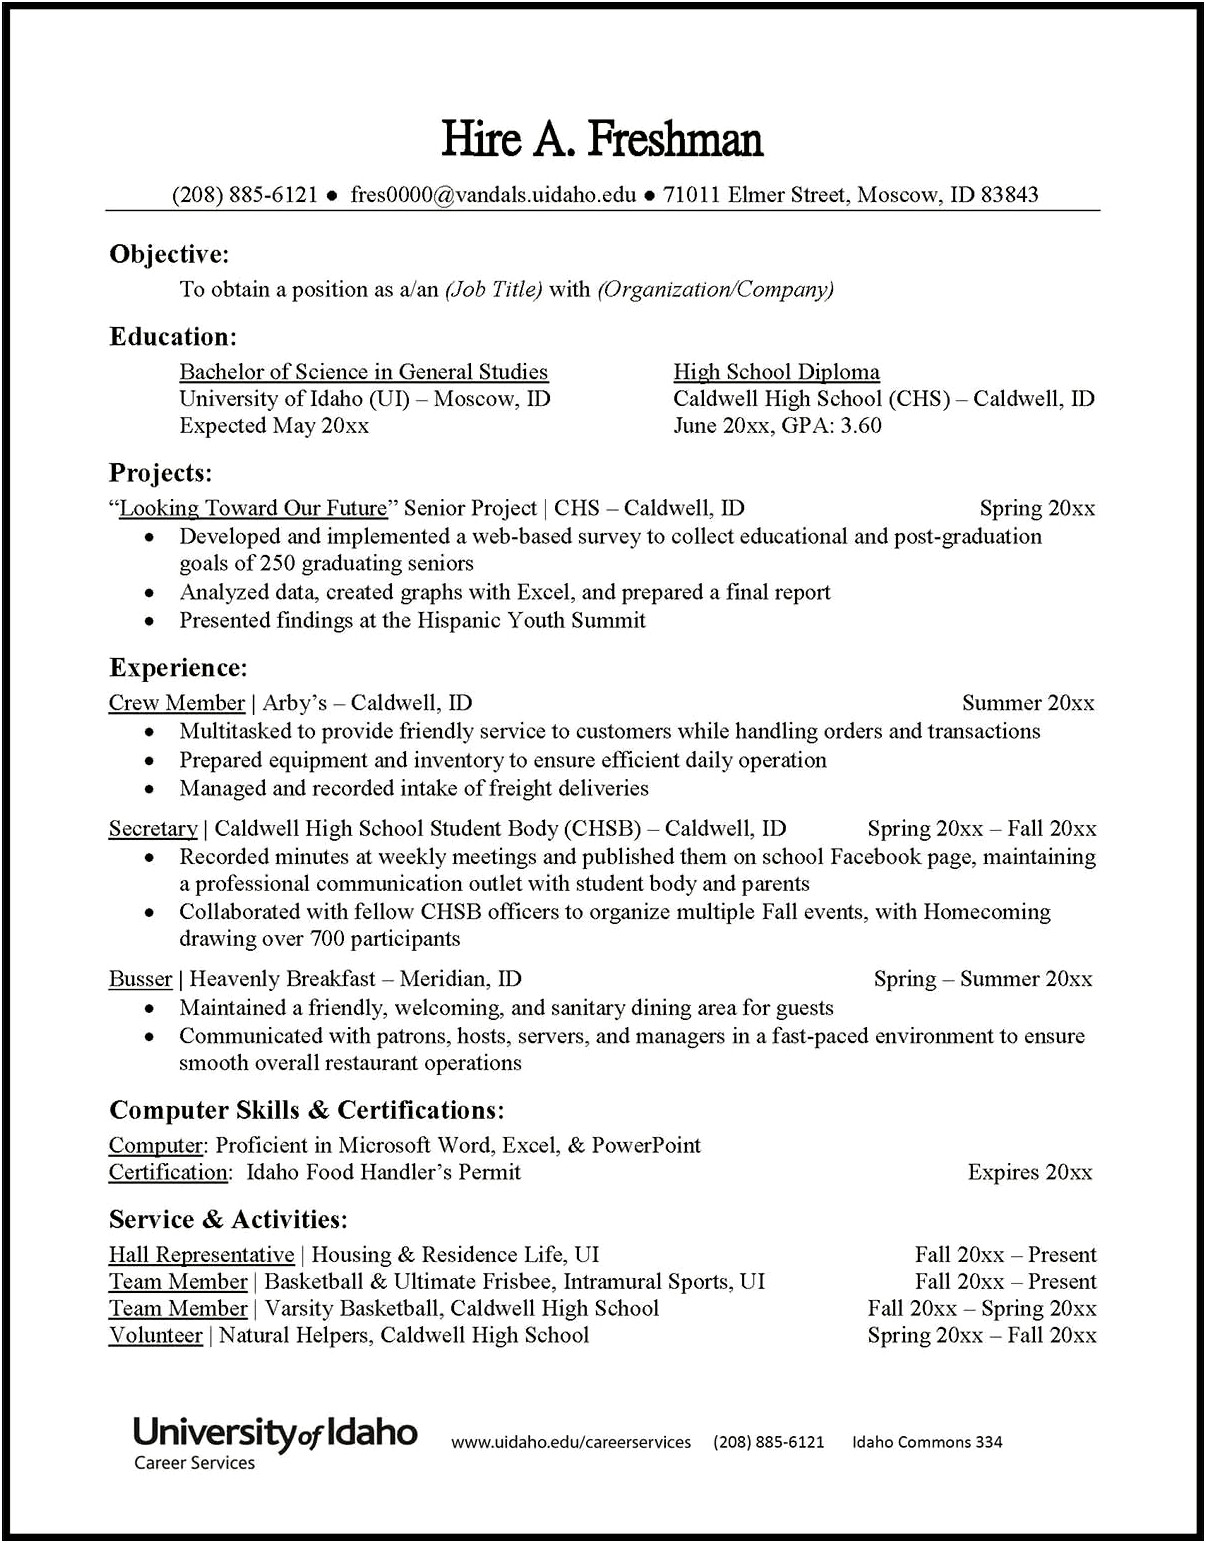 Where Can I Find Sample Resumes